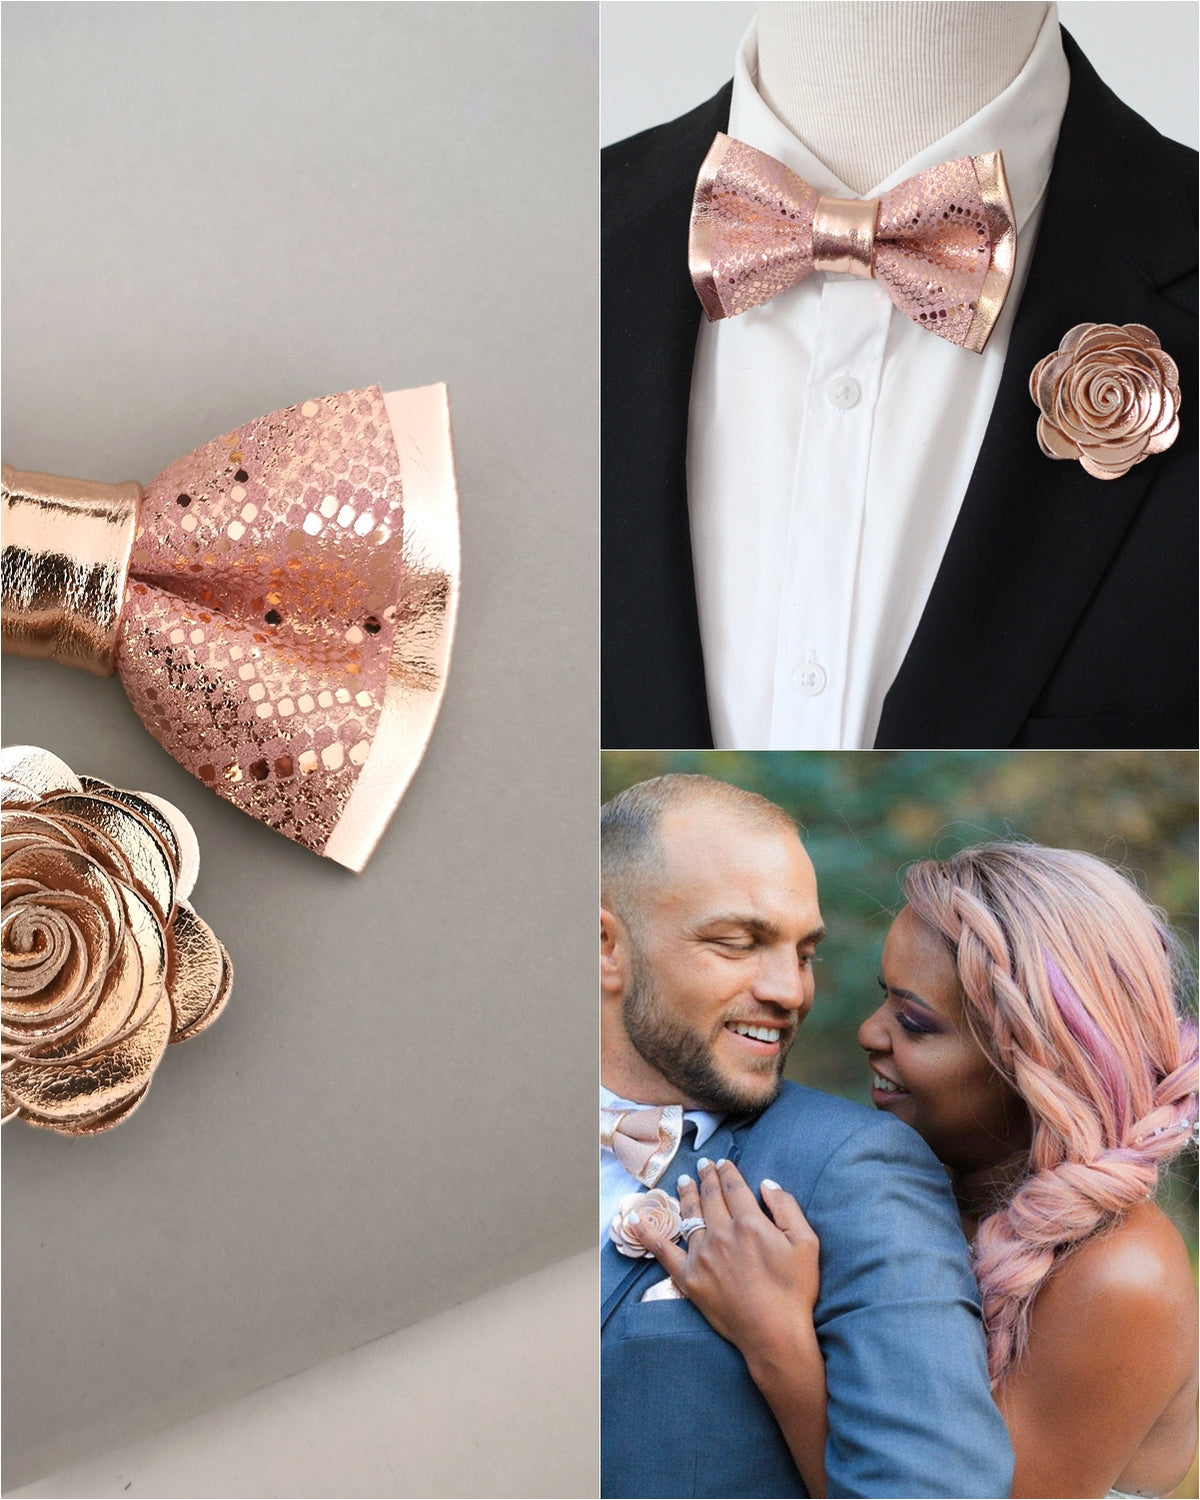 Rose gold metallic bow tie, rose gold mens bow tie, rose gold wedding bow tie, groomsmen rose gold bow tie set, rose gold bow tie and suspender set, boys prom rose gold suit set, rose gold boutonniere